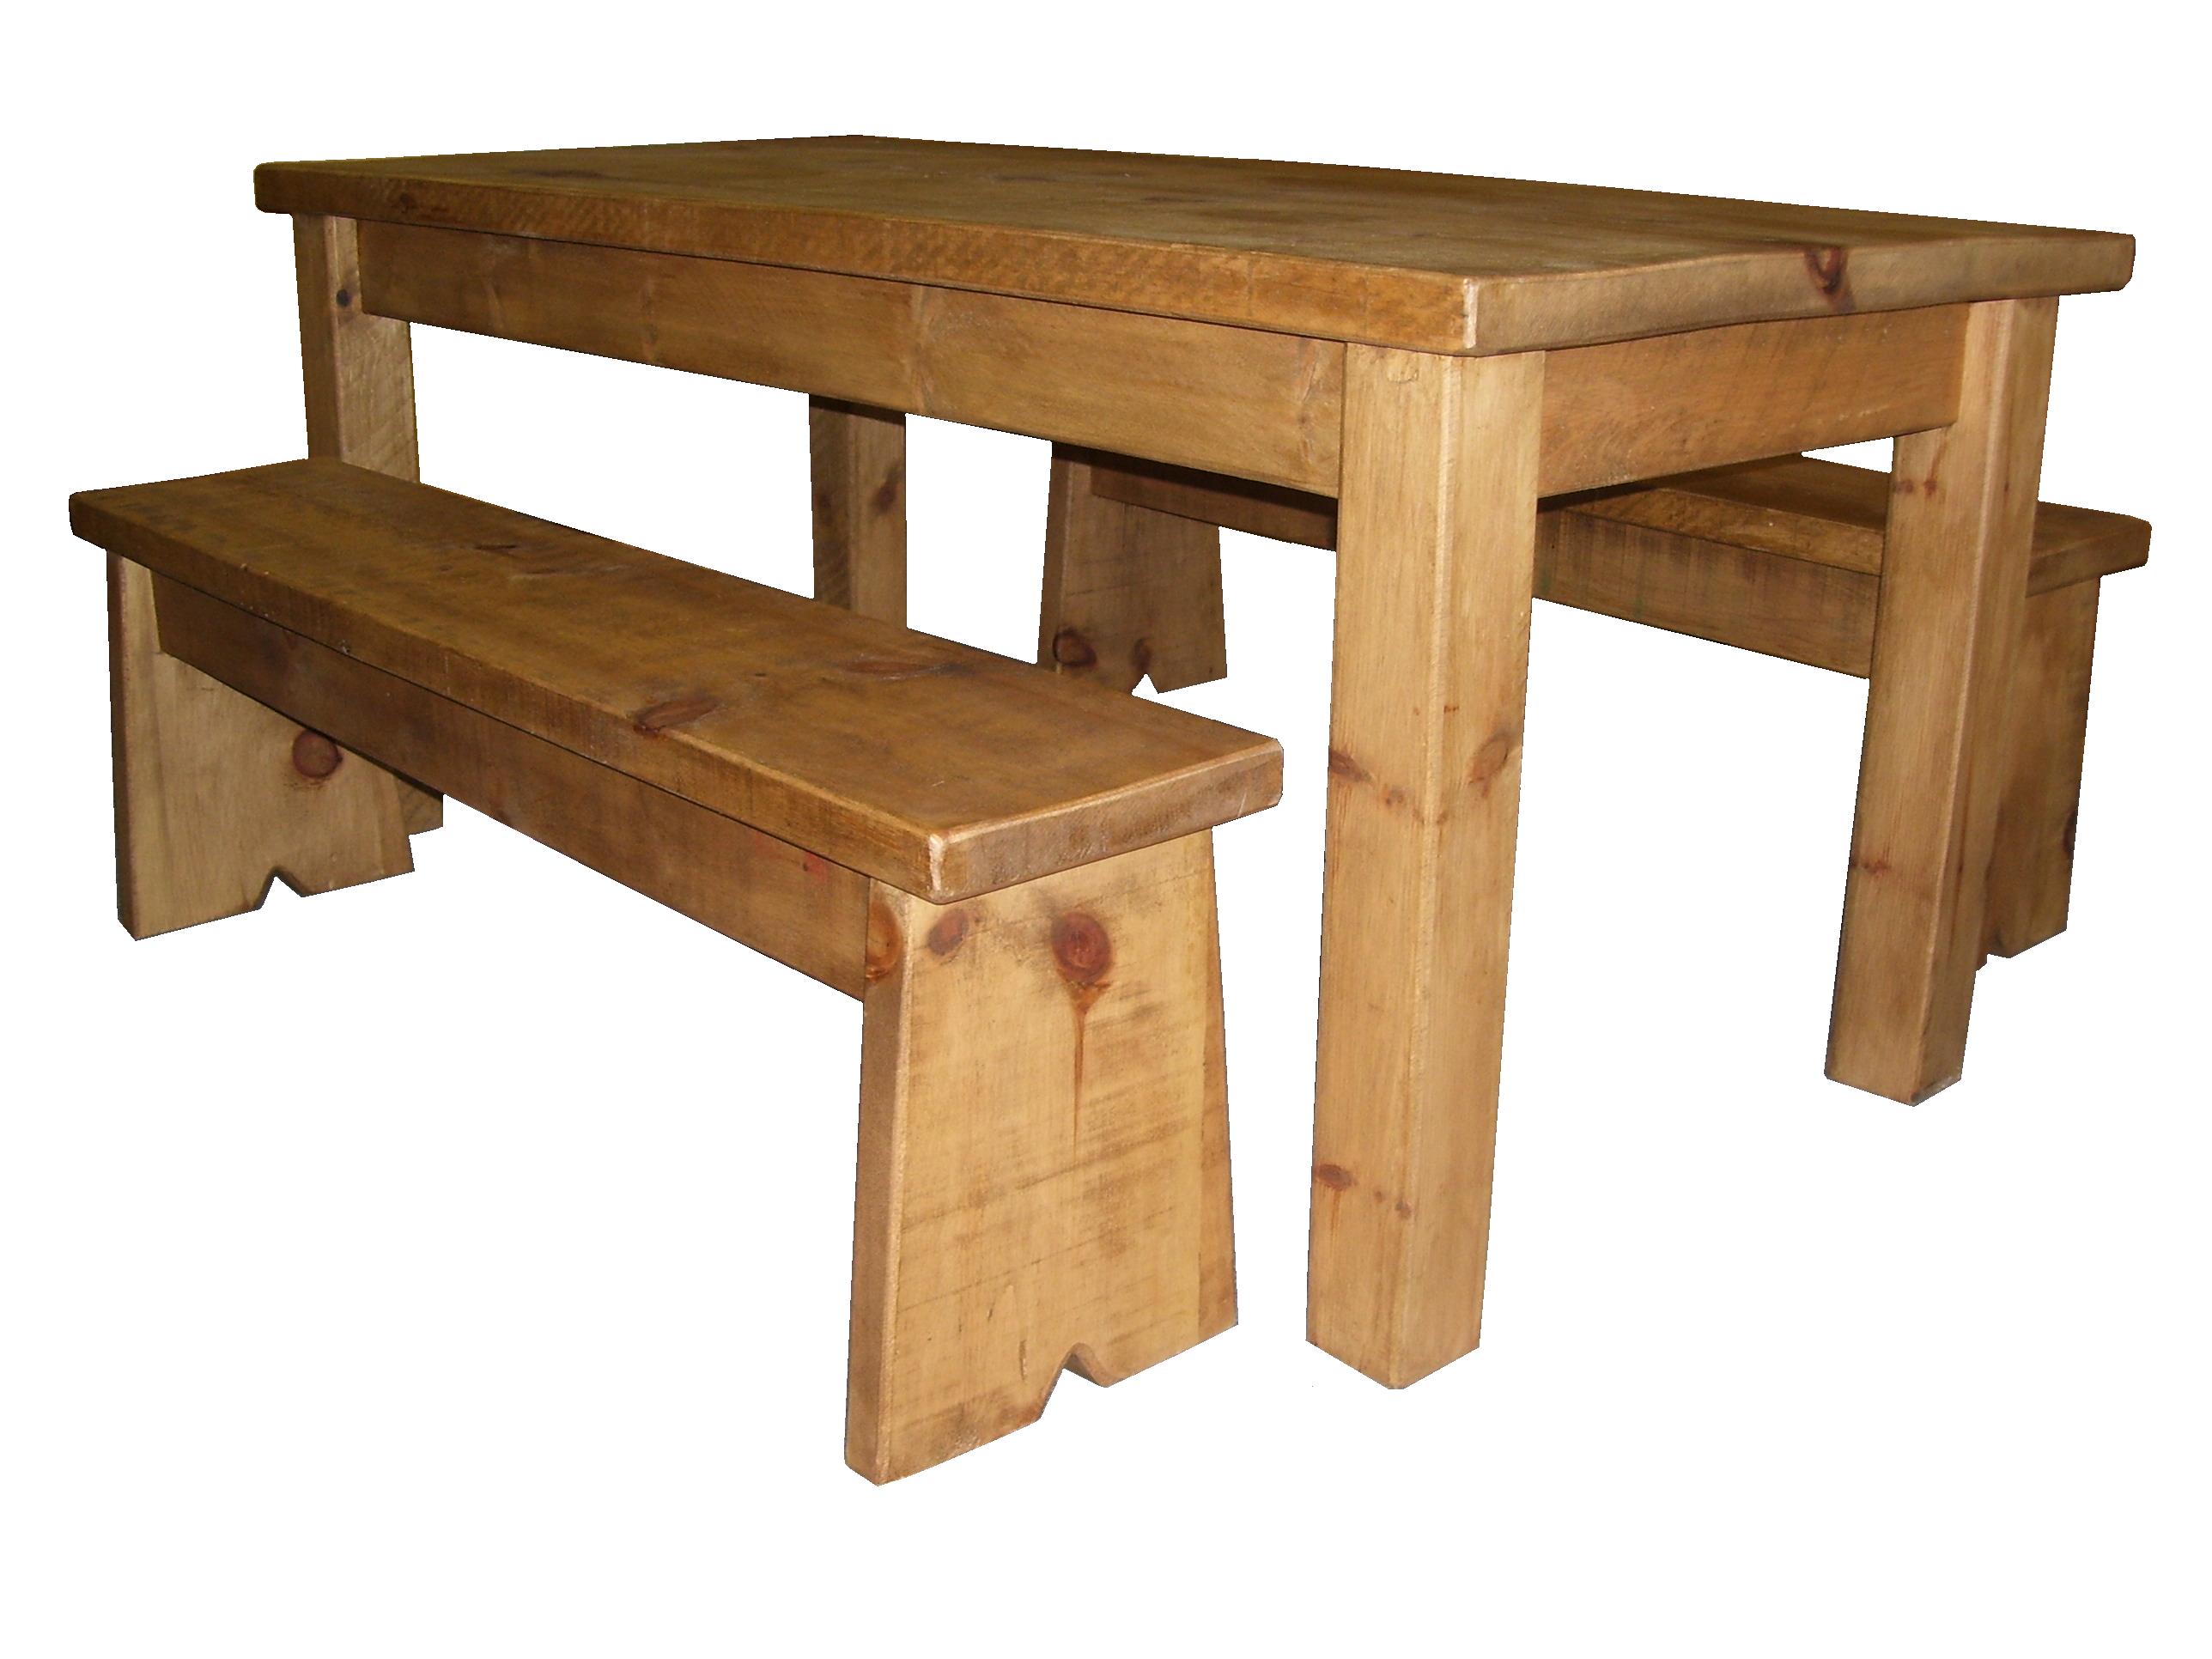 Rustic pine dining table bench | Hawk Haven